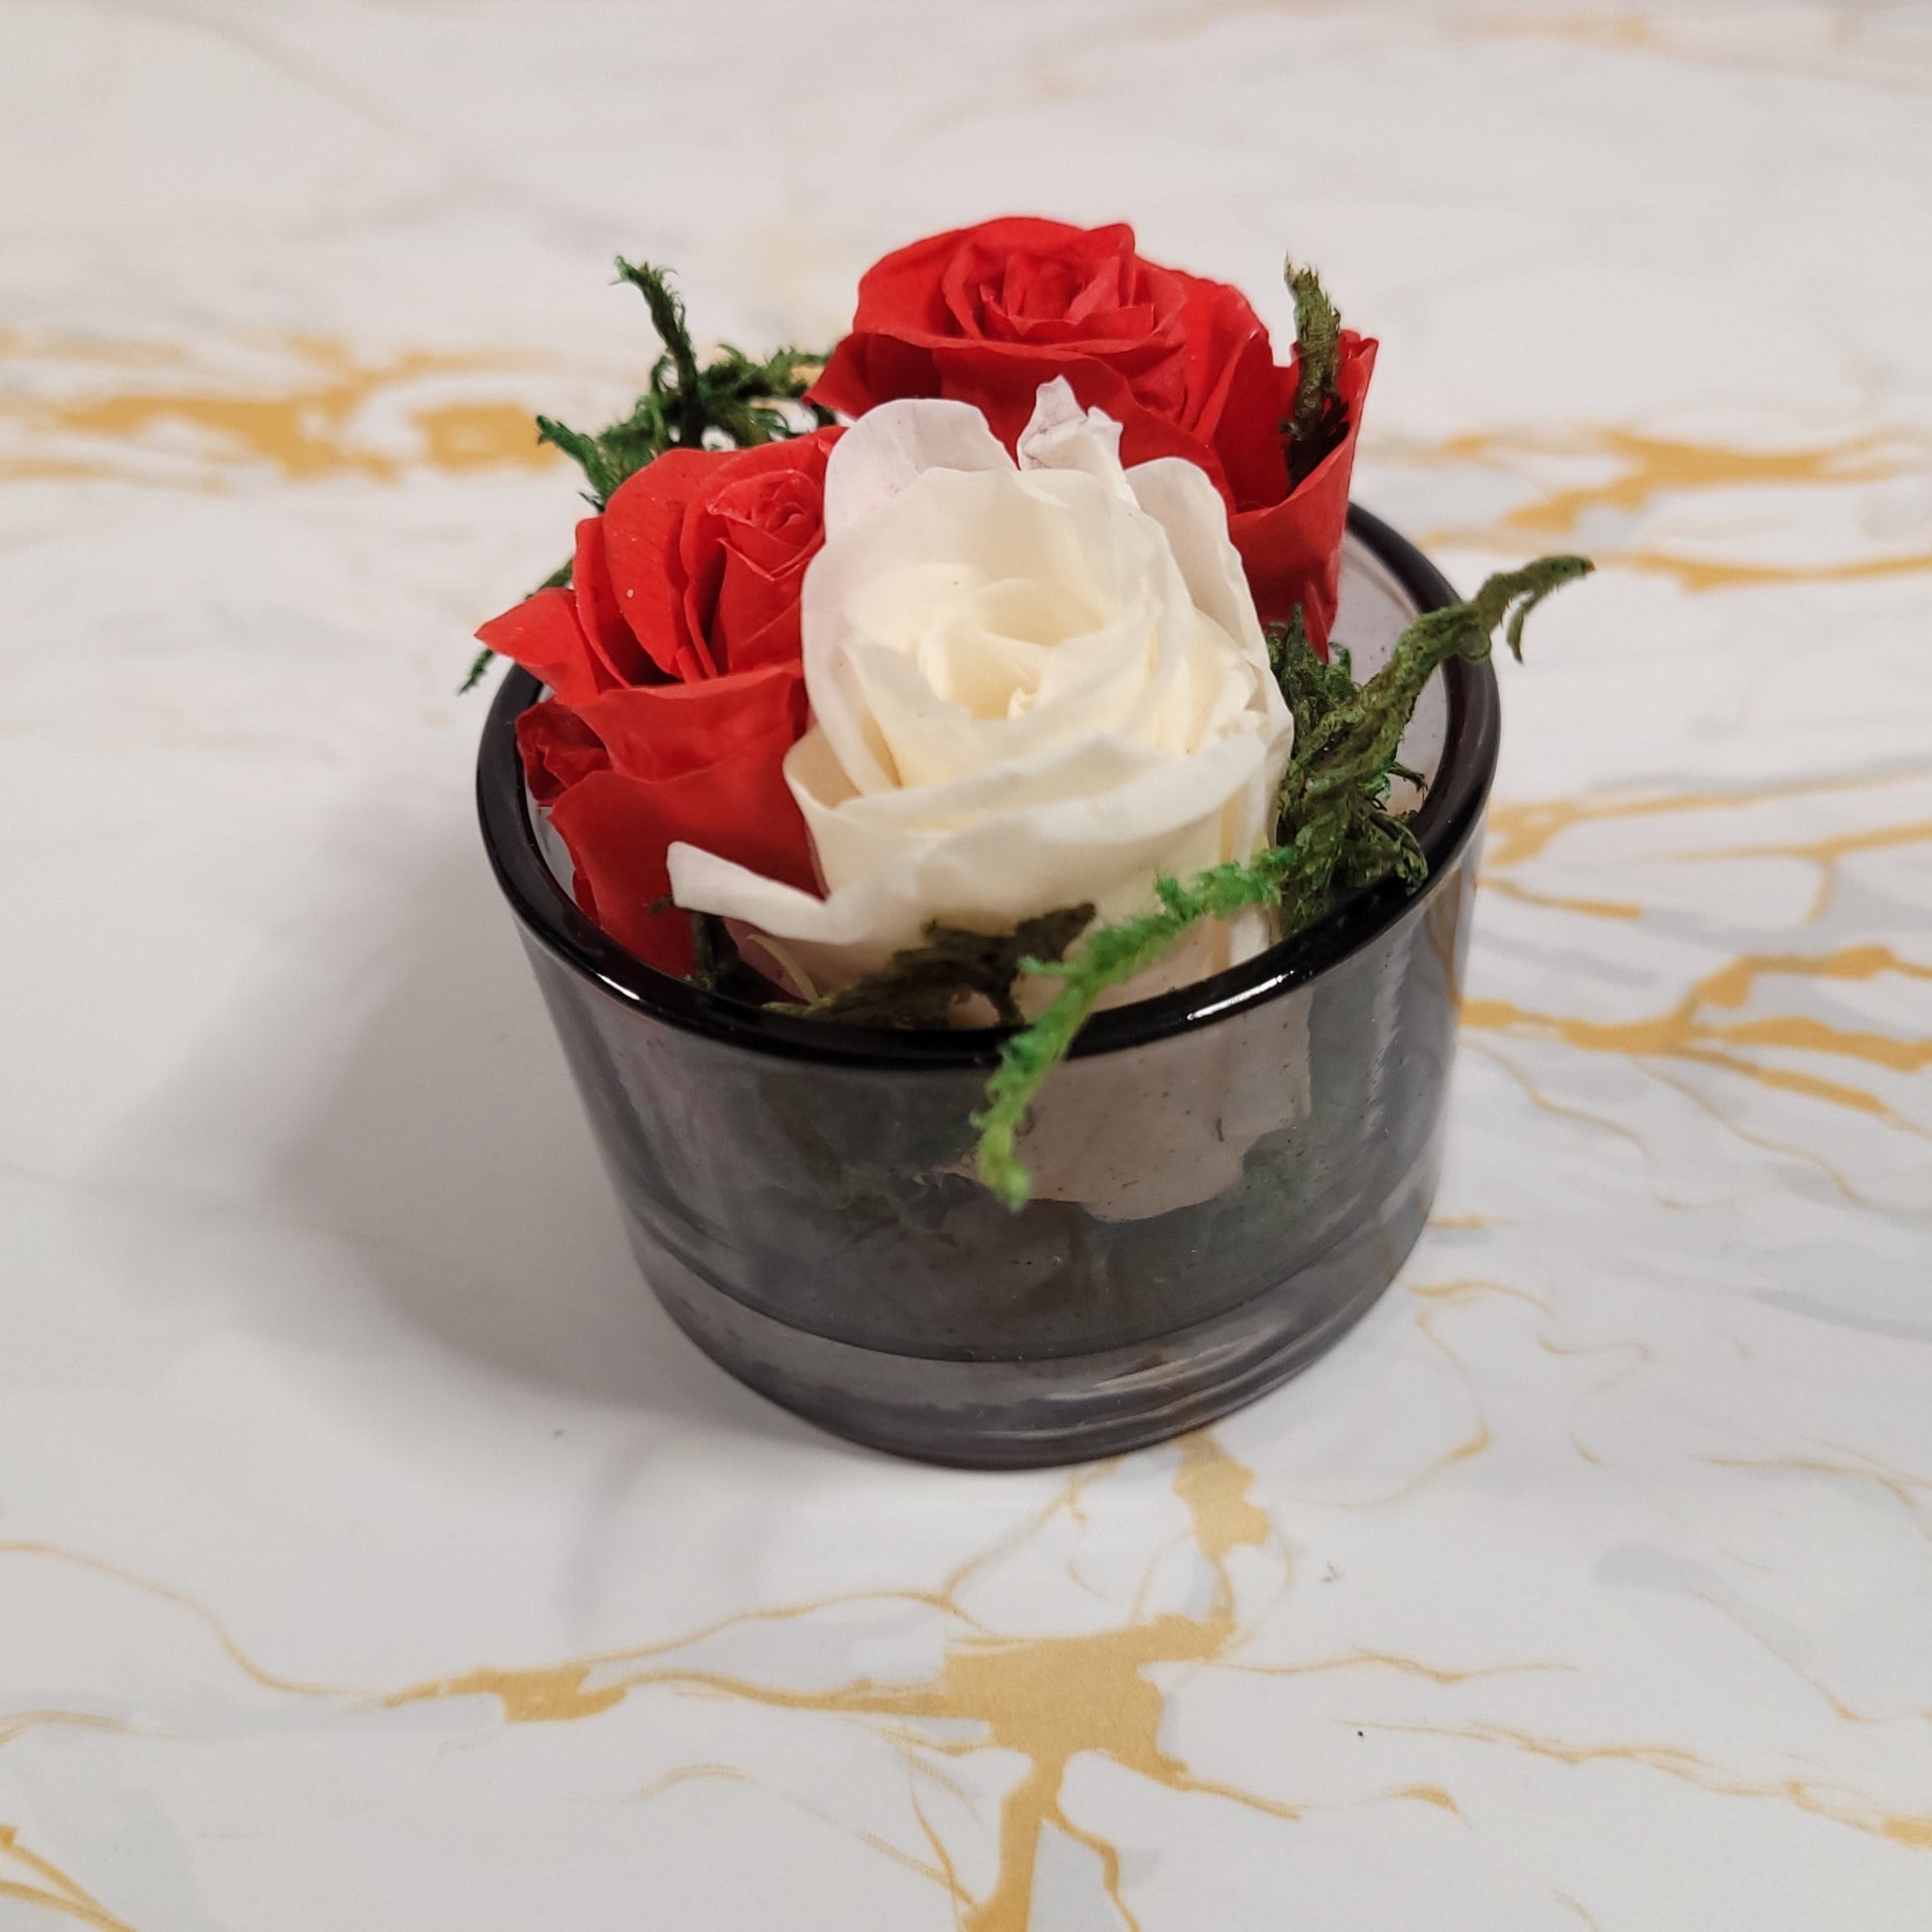 Saint Charbel St Valentine's Day Box - Our Lady of Gifts